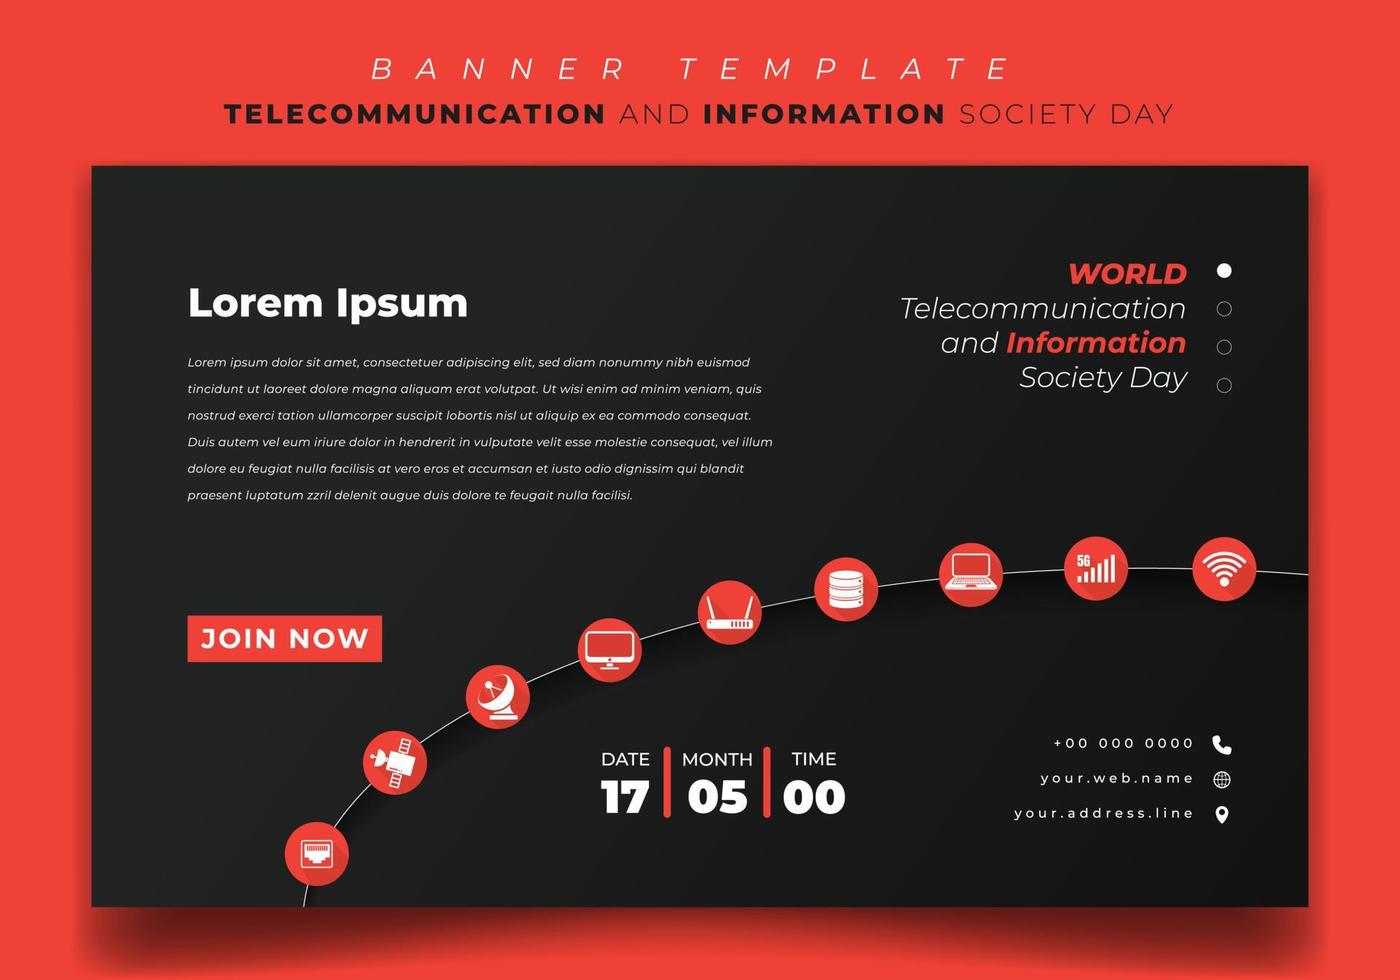 Banner template for telecommunication and information society in black orange background design vector